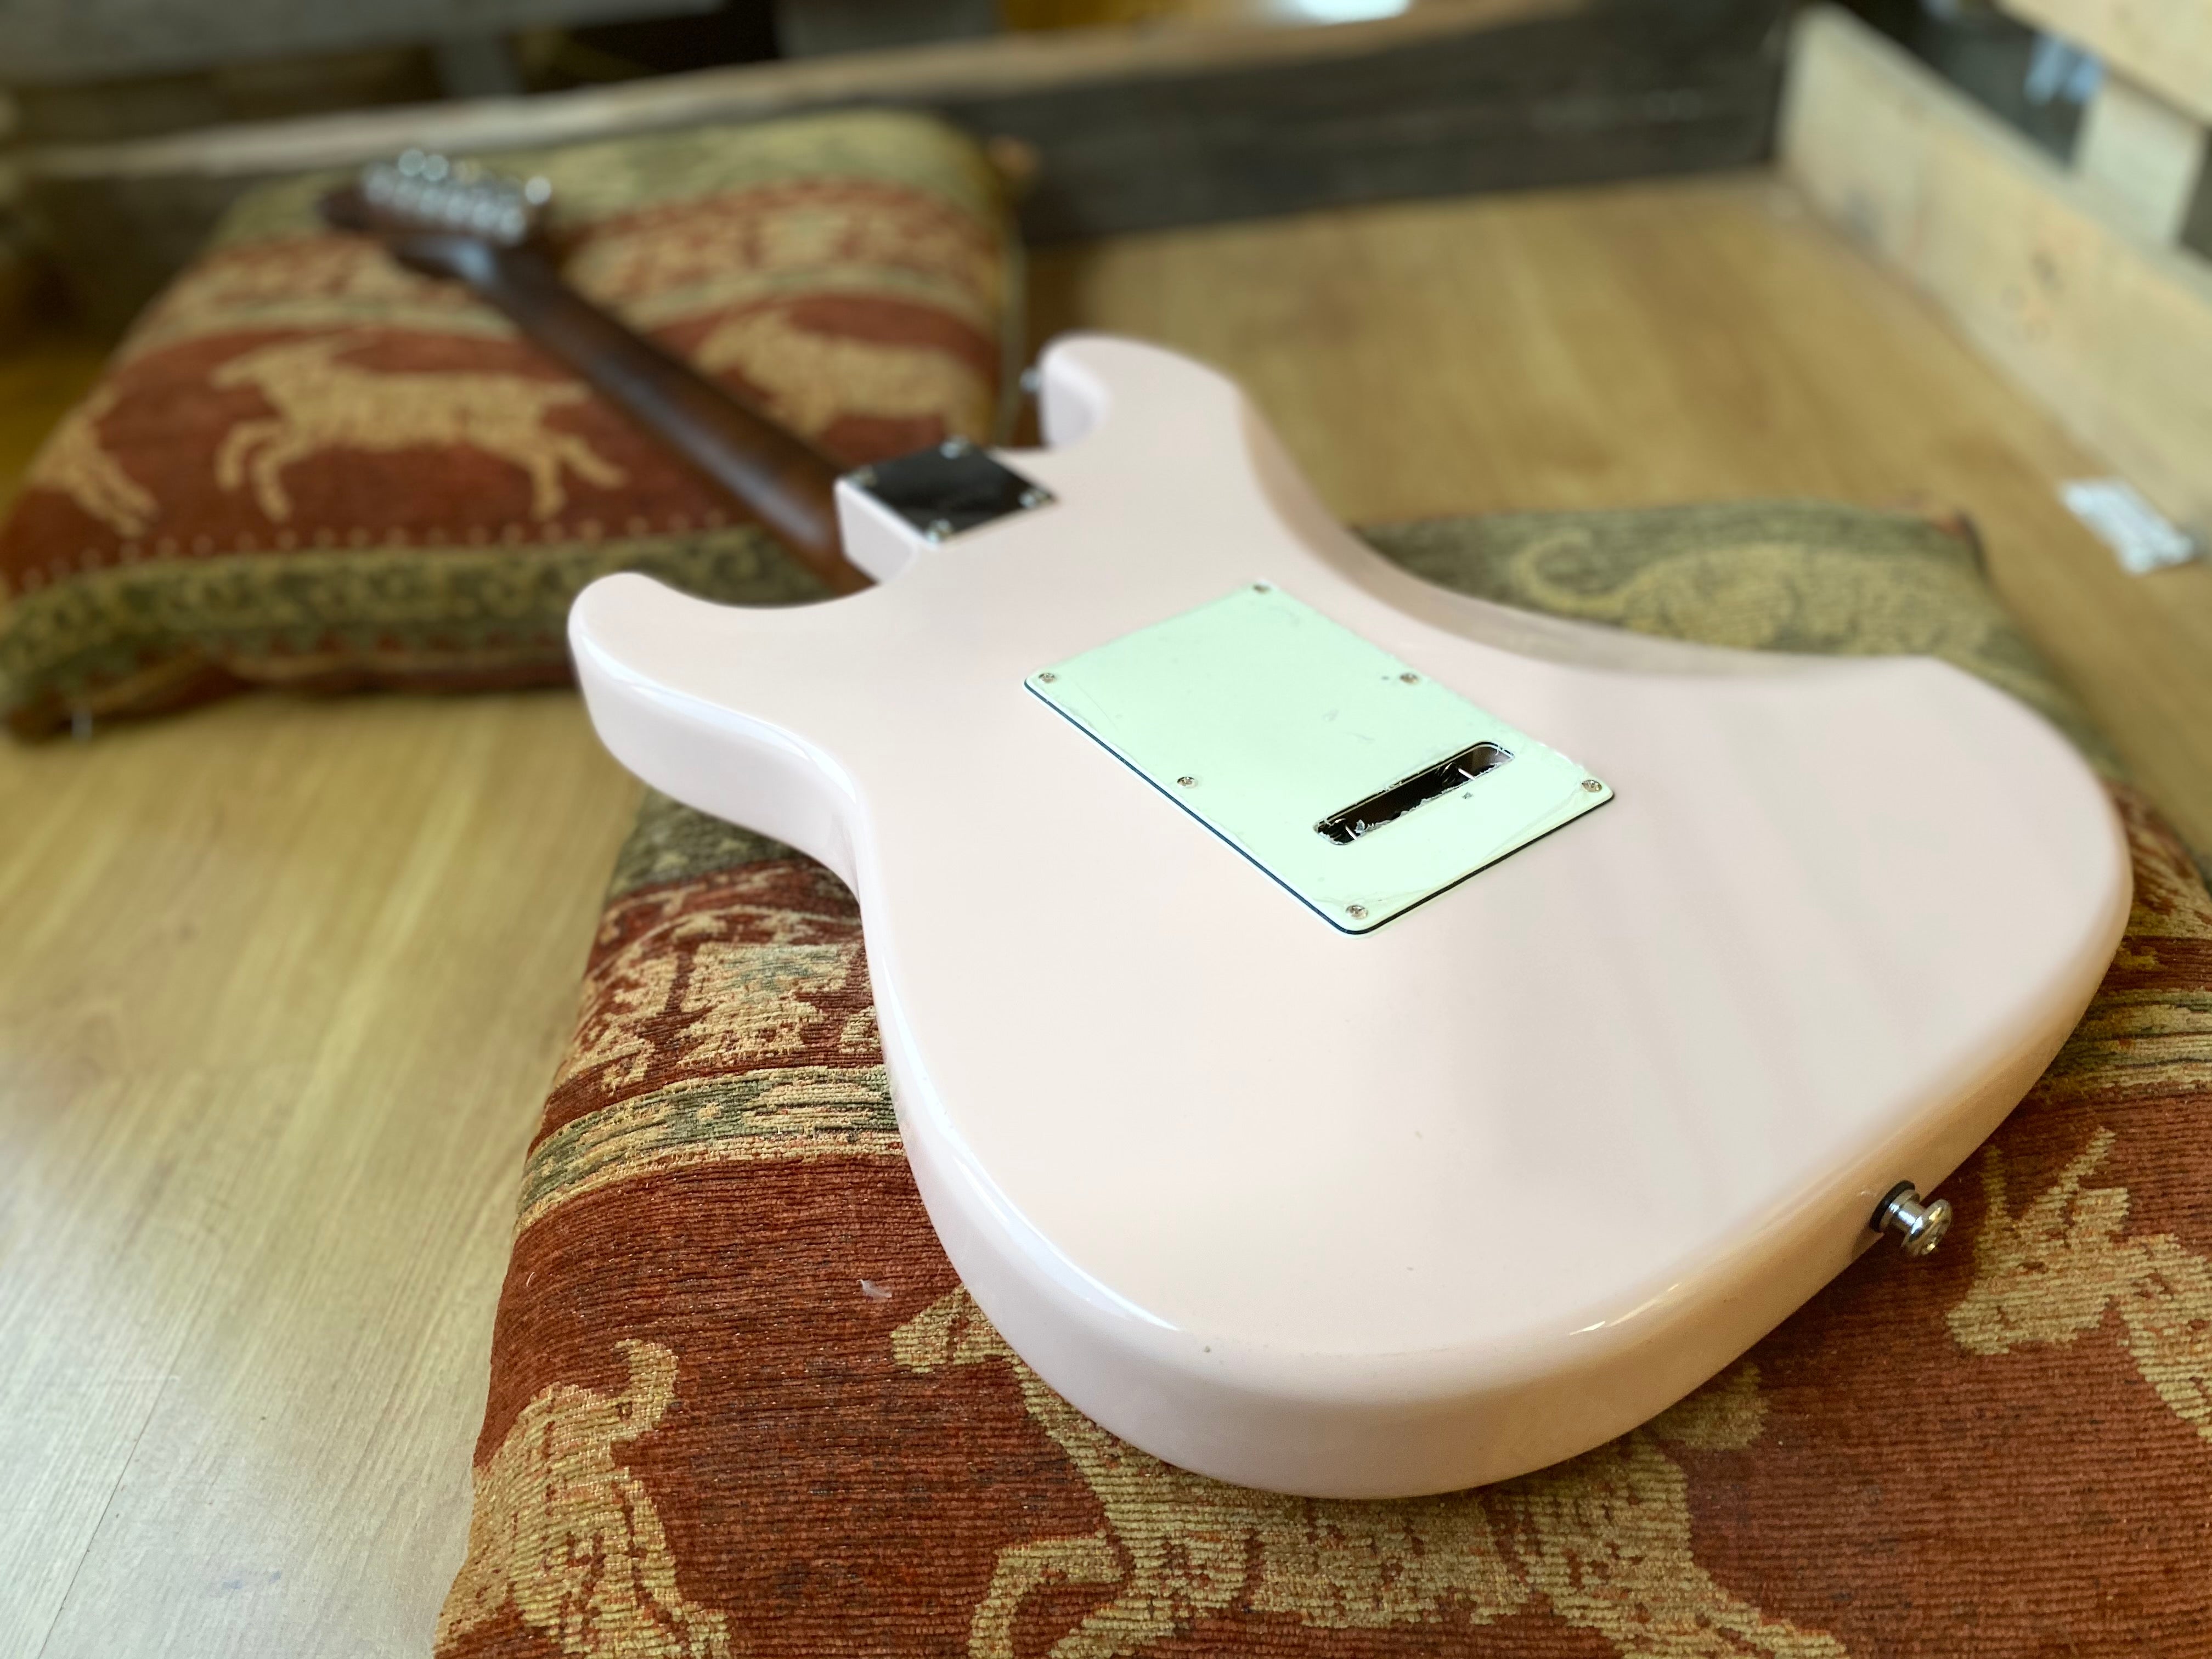 Gordon Smith Classic S HSS Powder Pink Custom, Electric Guitar for sale at Richards Guitars.